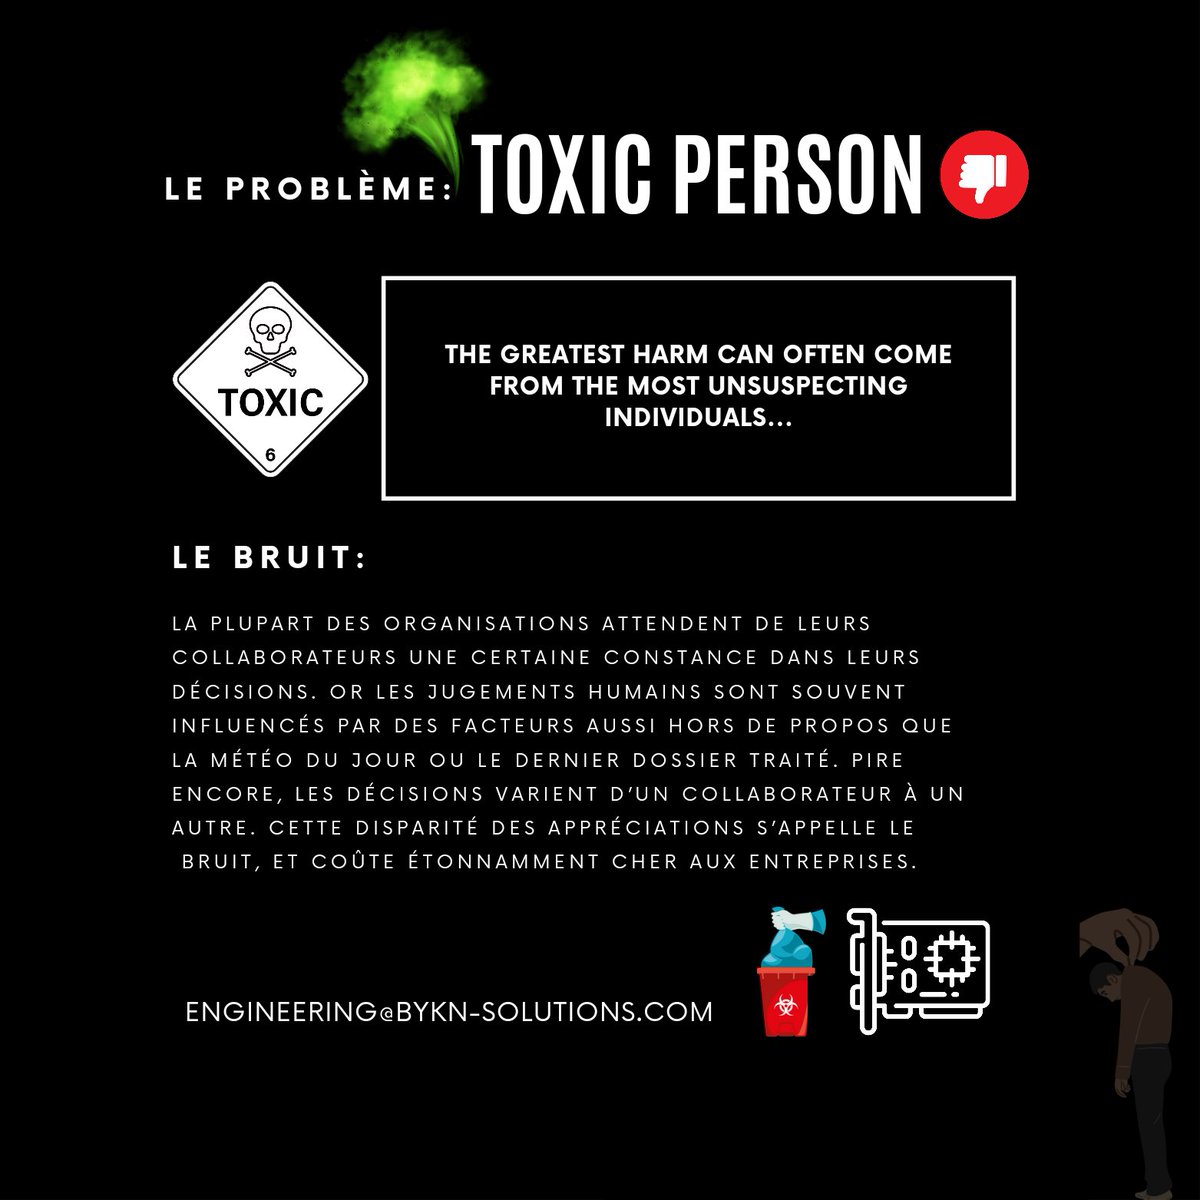 #toxicpeople #managementchallenges #managementtoxic #bruit #حسود #لايسود #dataprivacylaw #privacydata #لاشيء #الشر